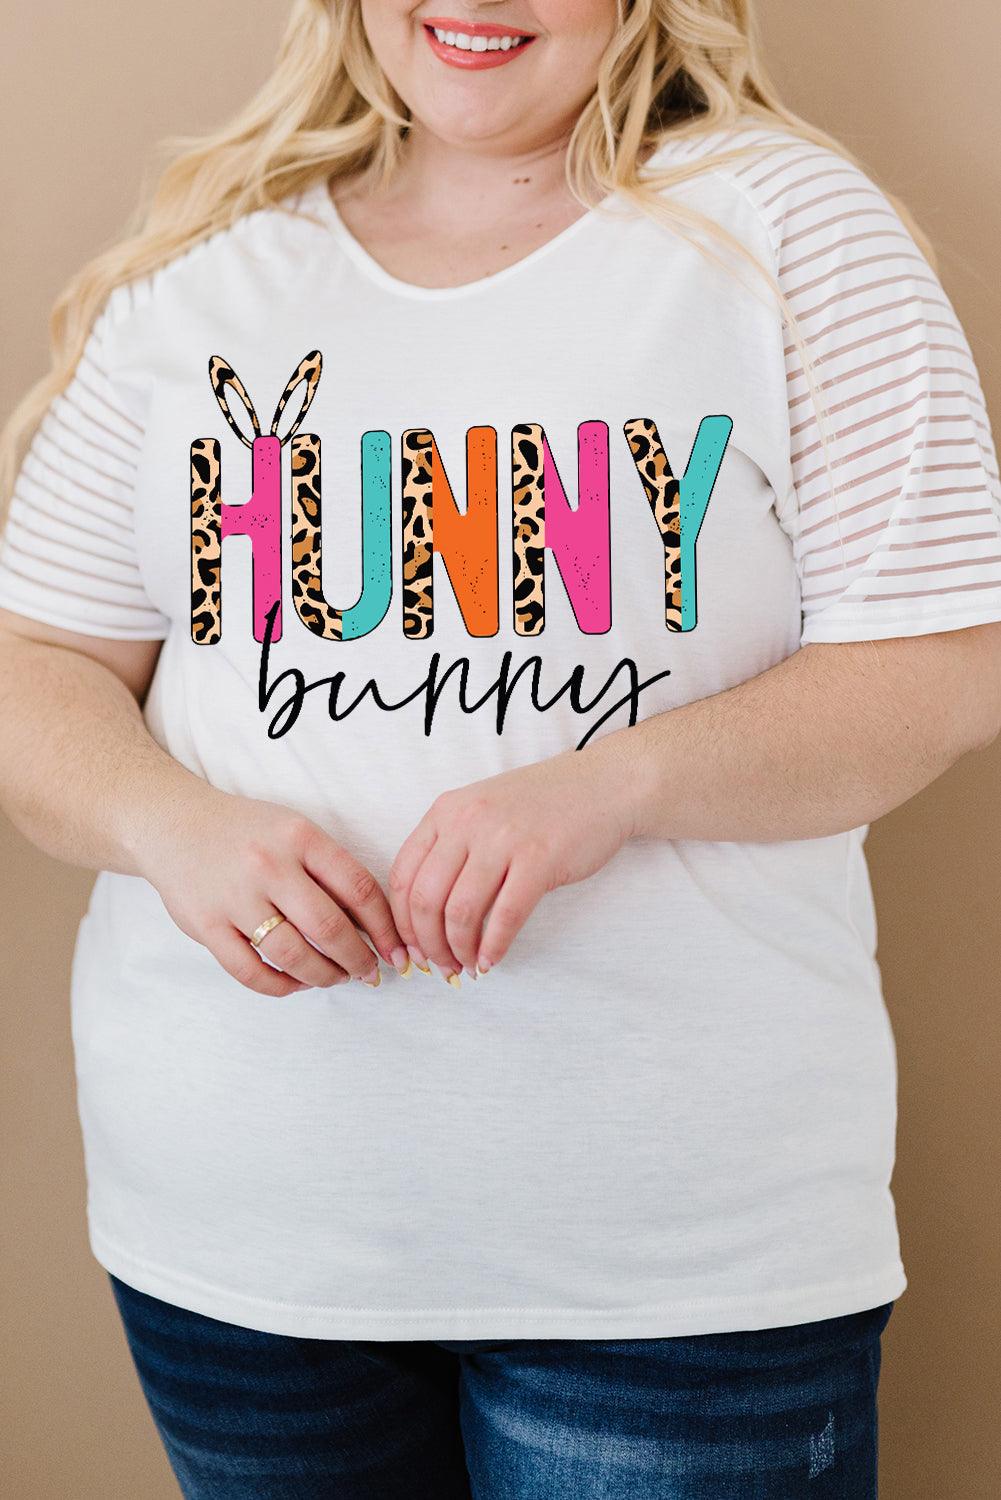 Plus Size HUNNY BUNNY Graphic Striped Tee - Flyclothing LLC